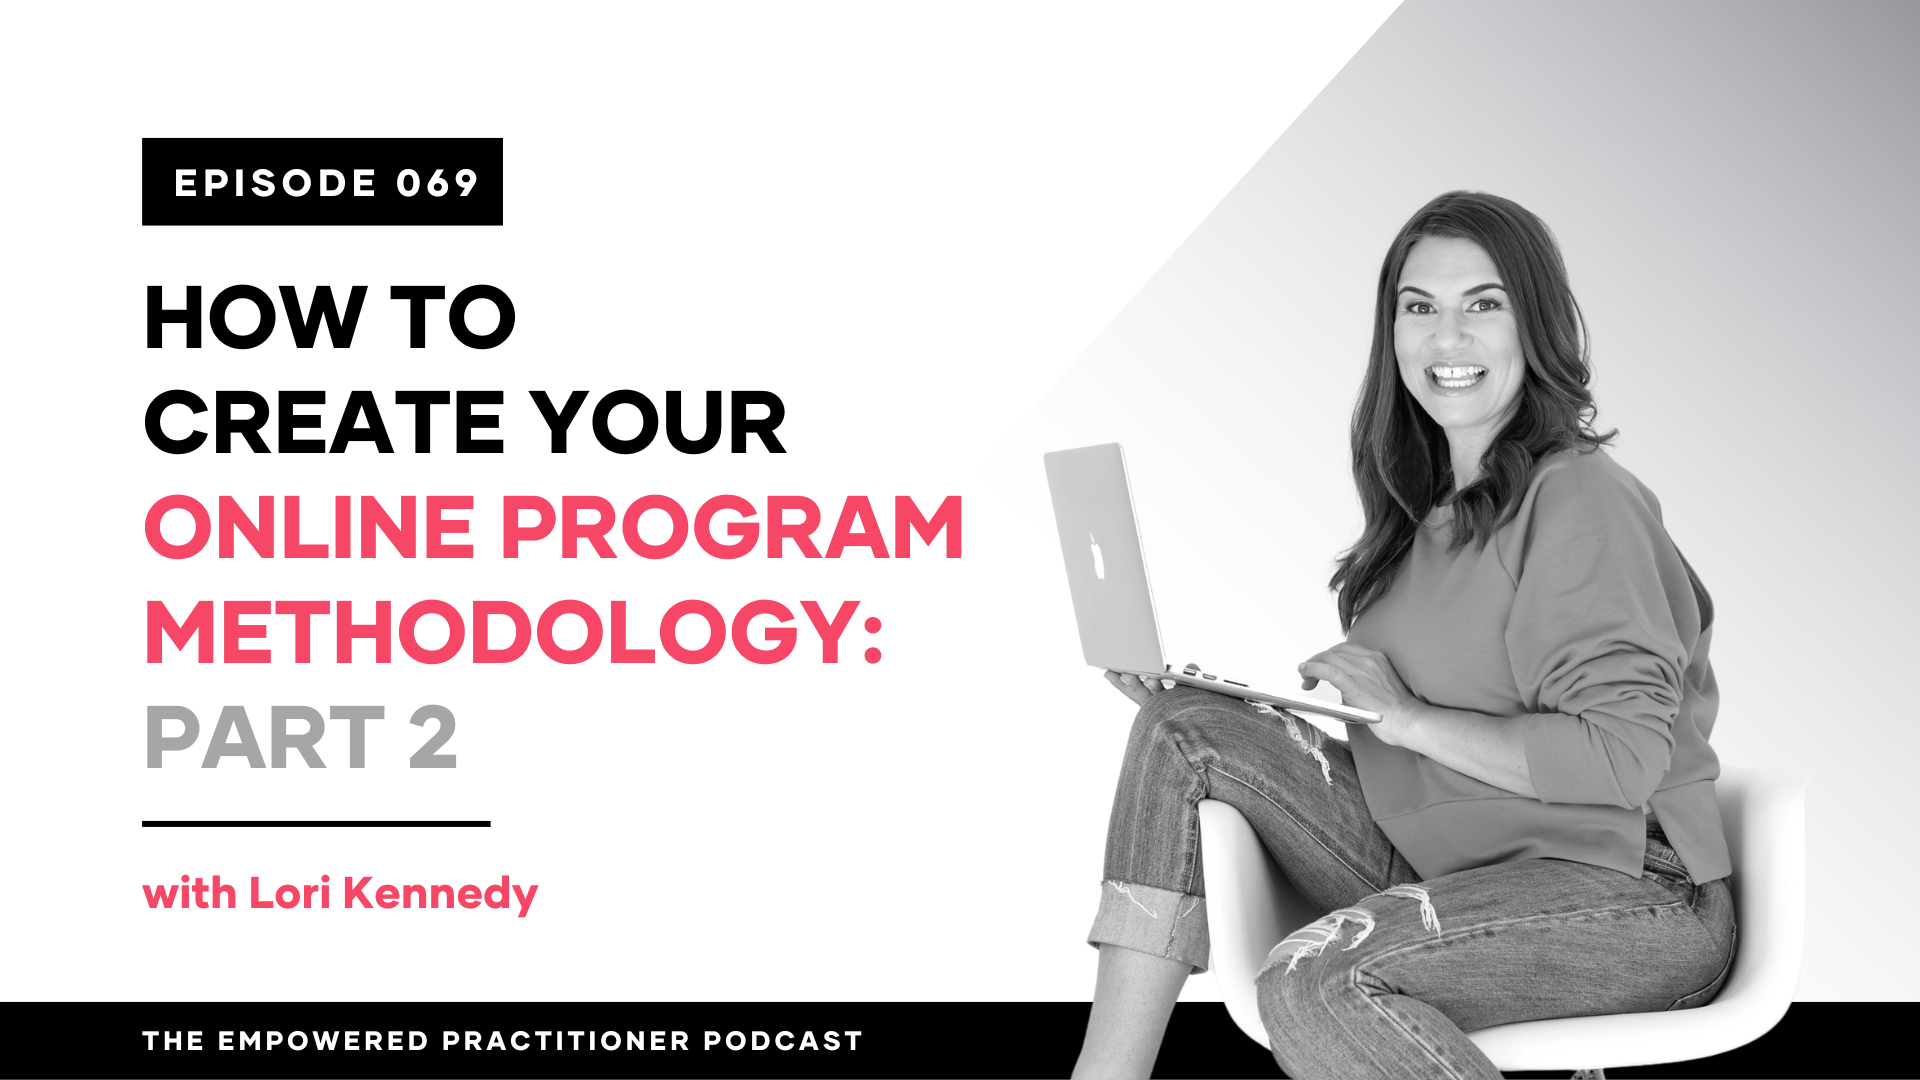 Part 2: How To Create Your Online Program Methodology